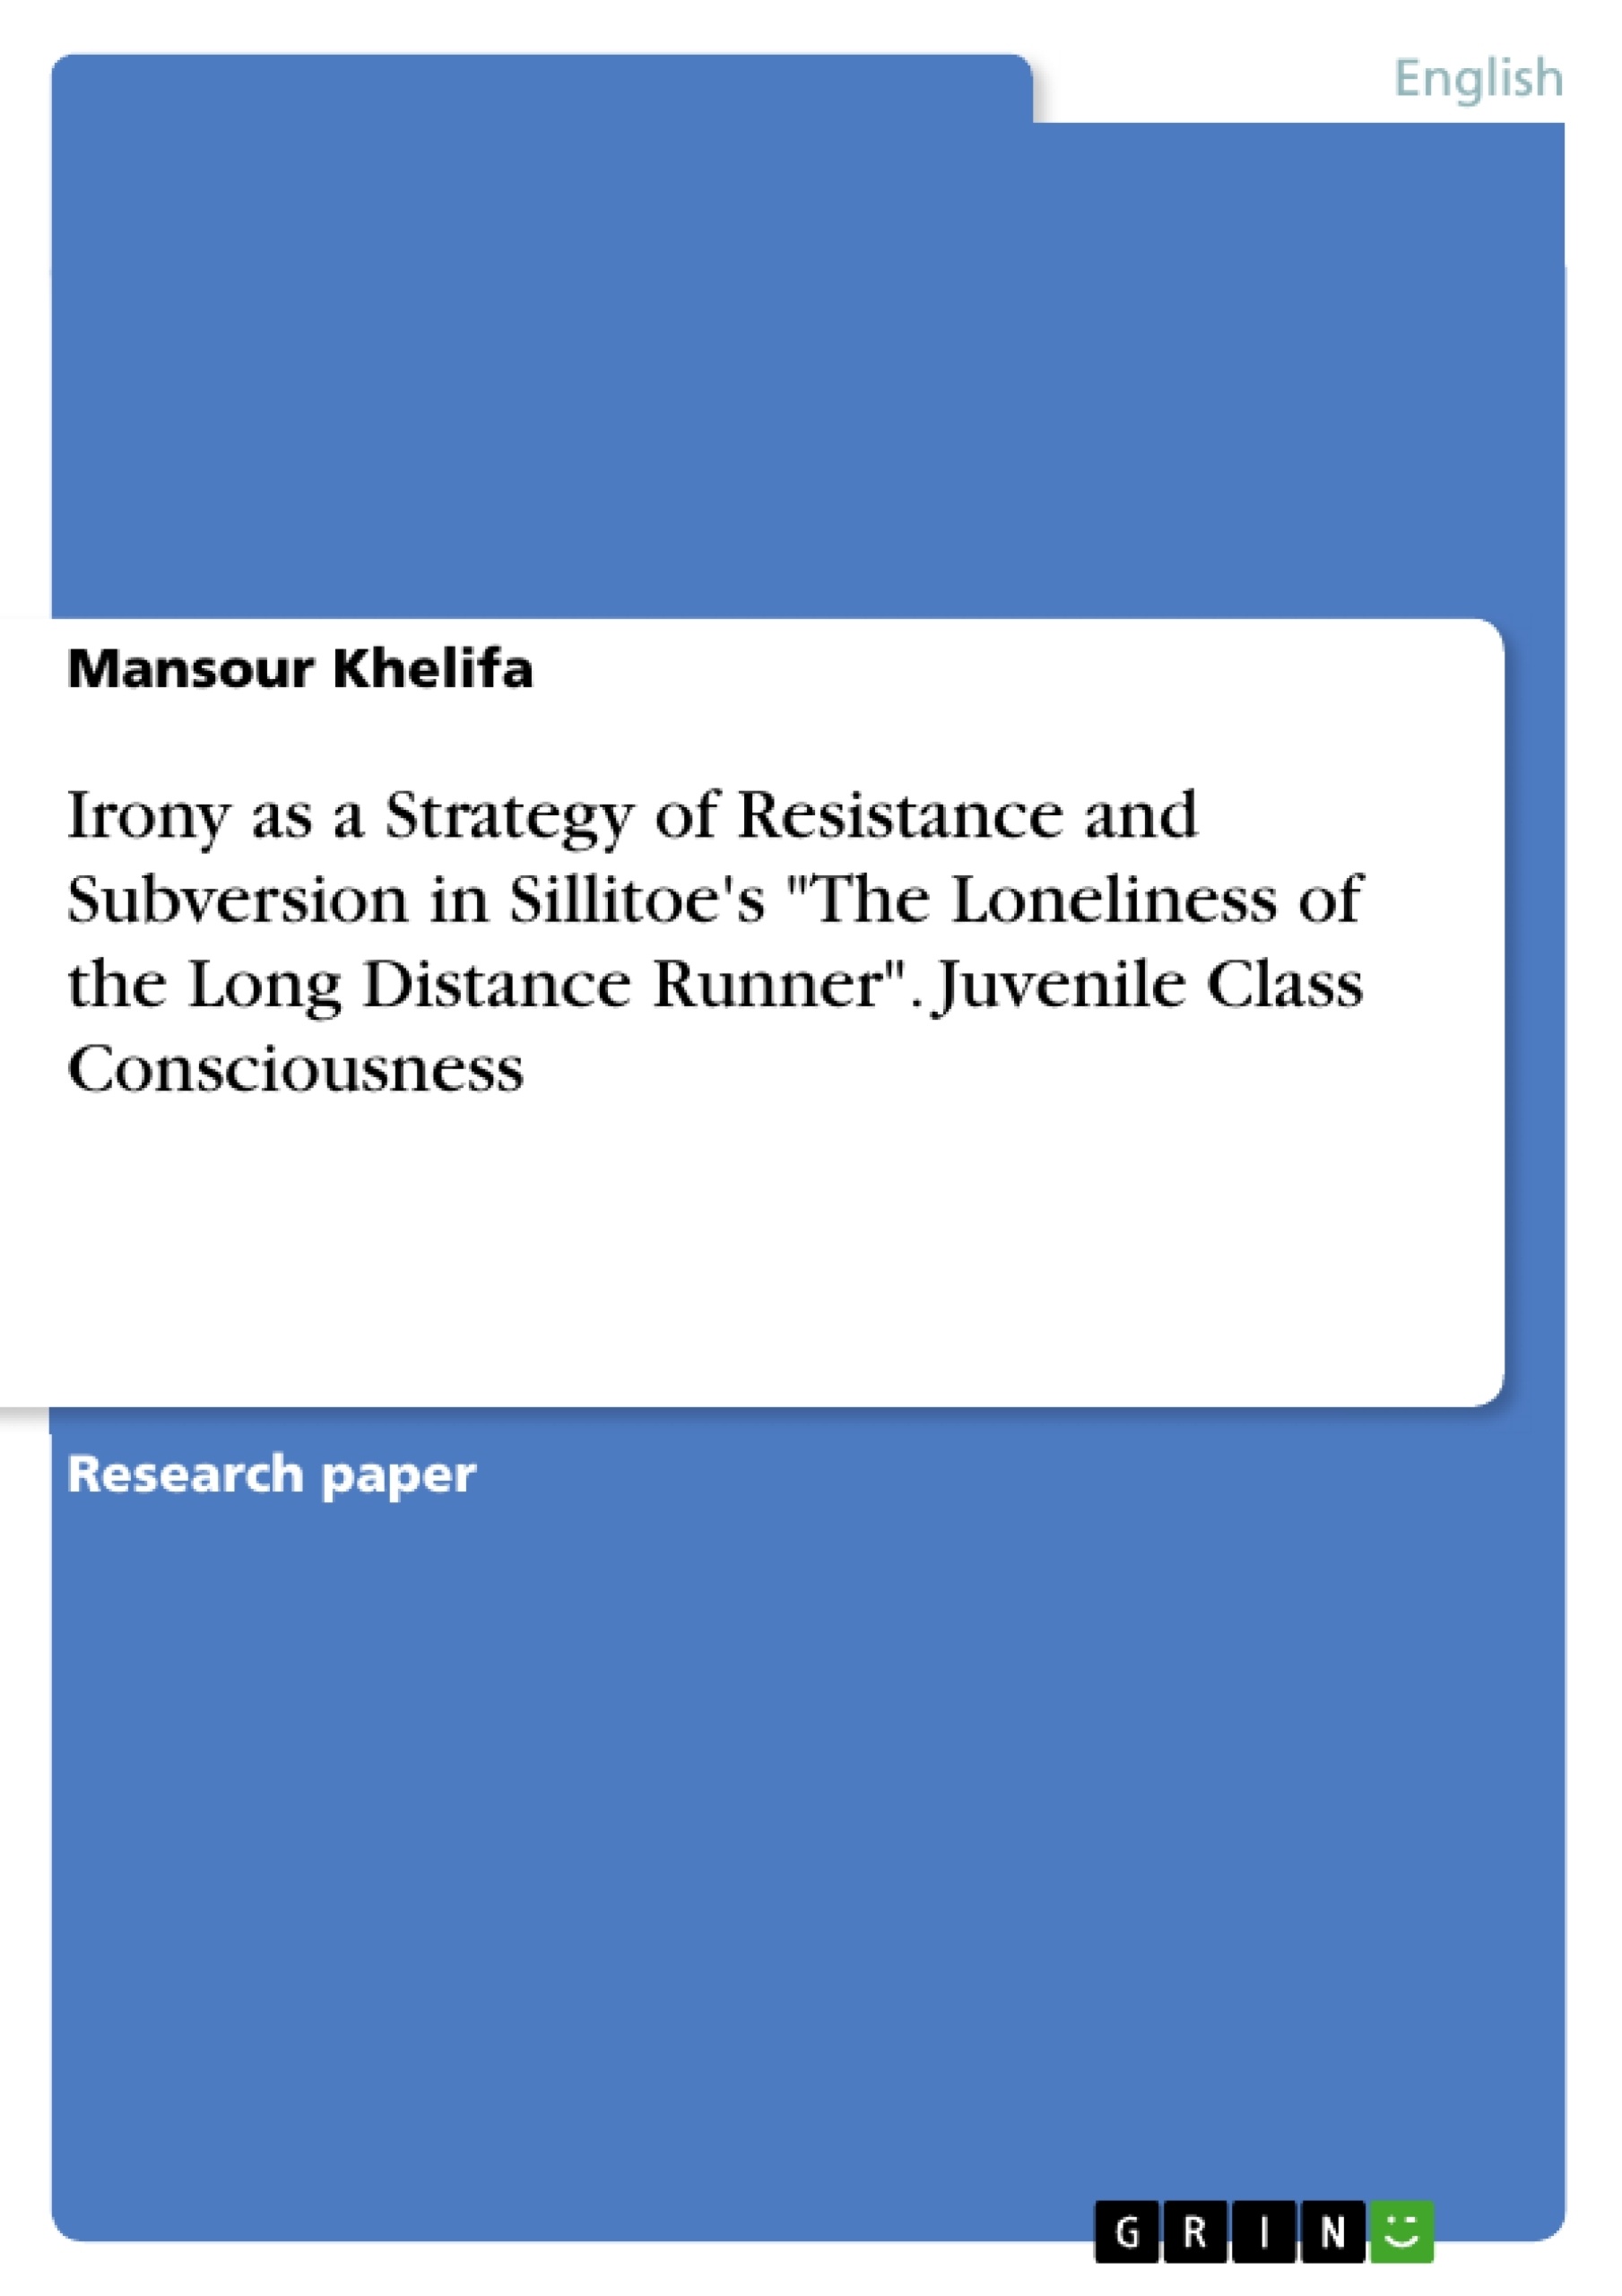 Title: Irony as a Strategy of Resistance and Subversion in Sillitoe's "The Loneliness of the Long Distance Runner". Juvenile Class Consciousness